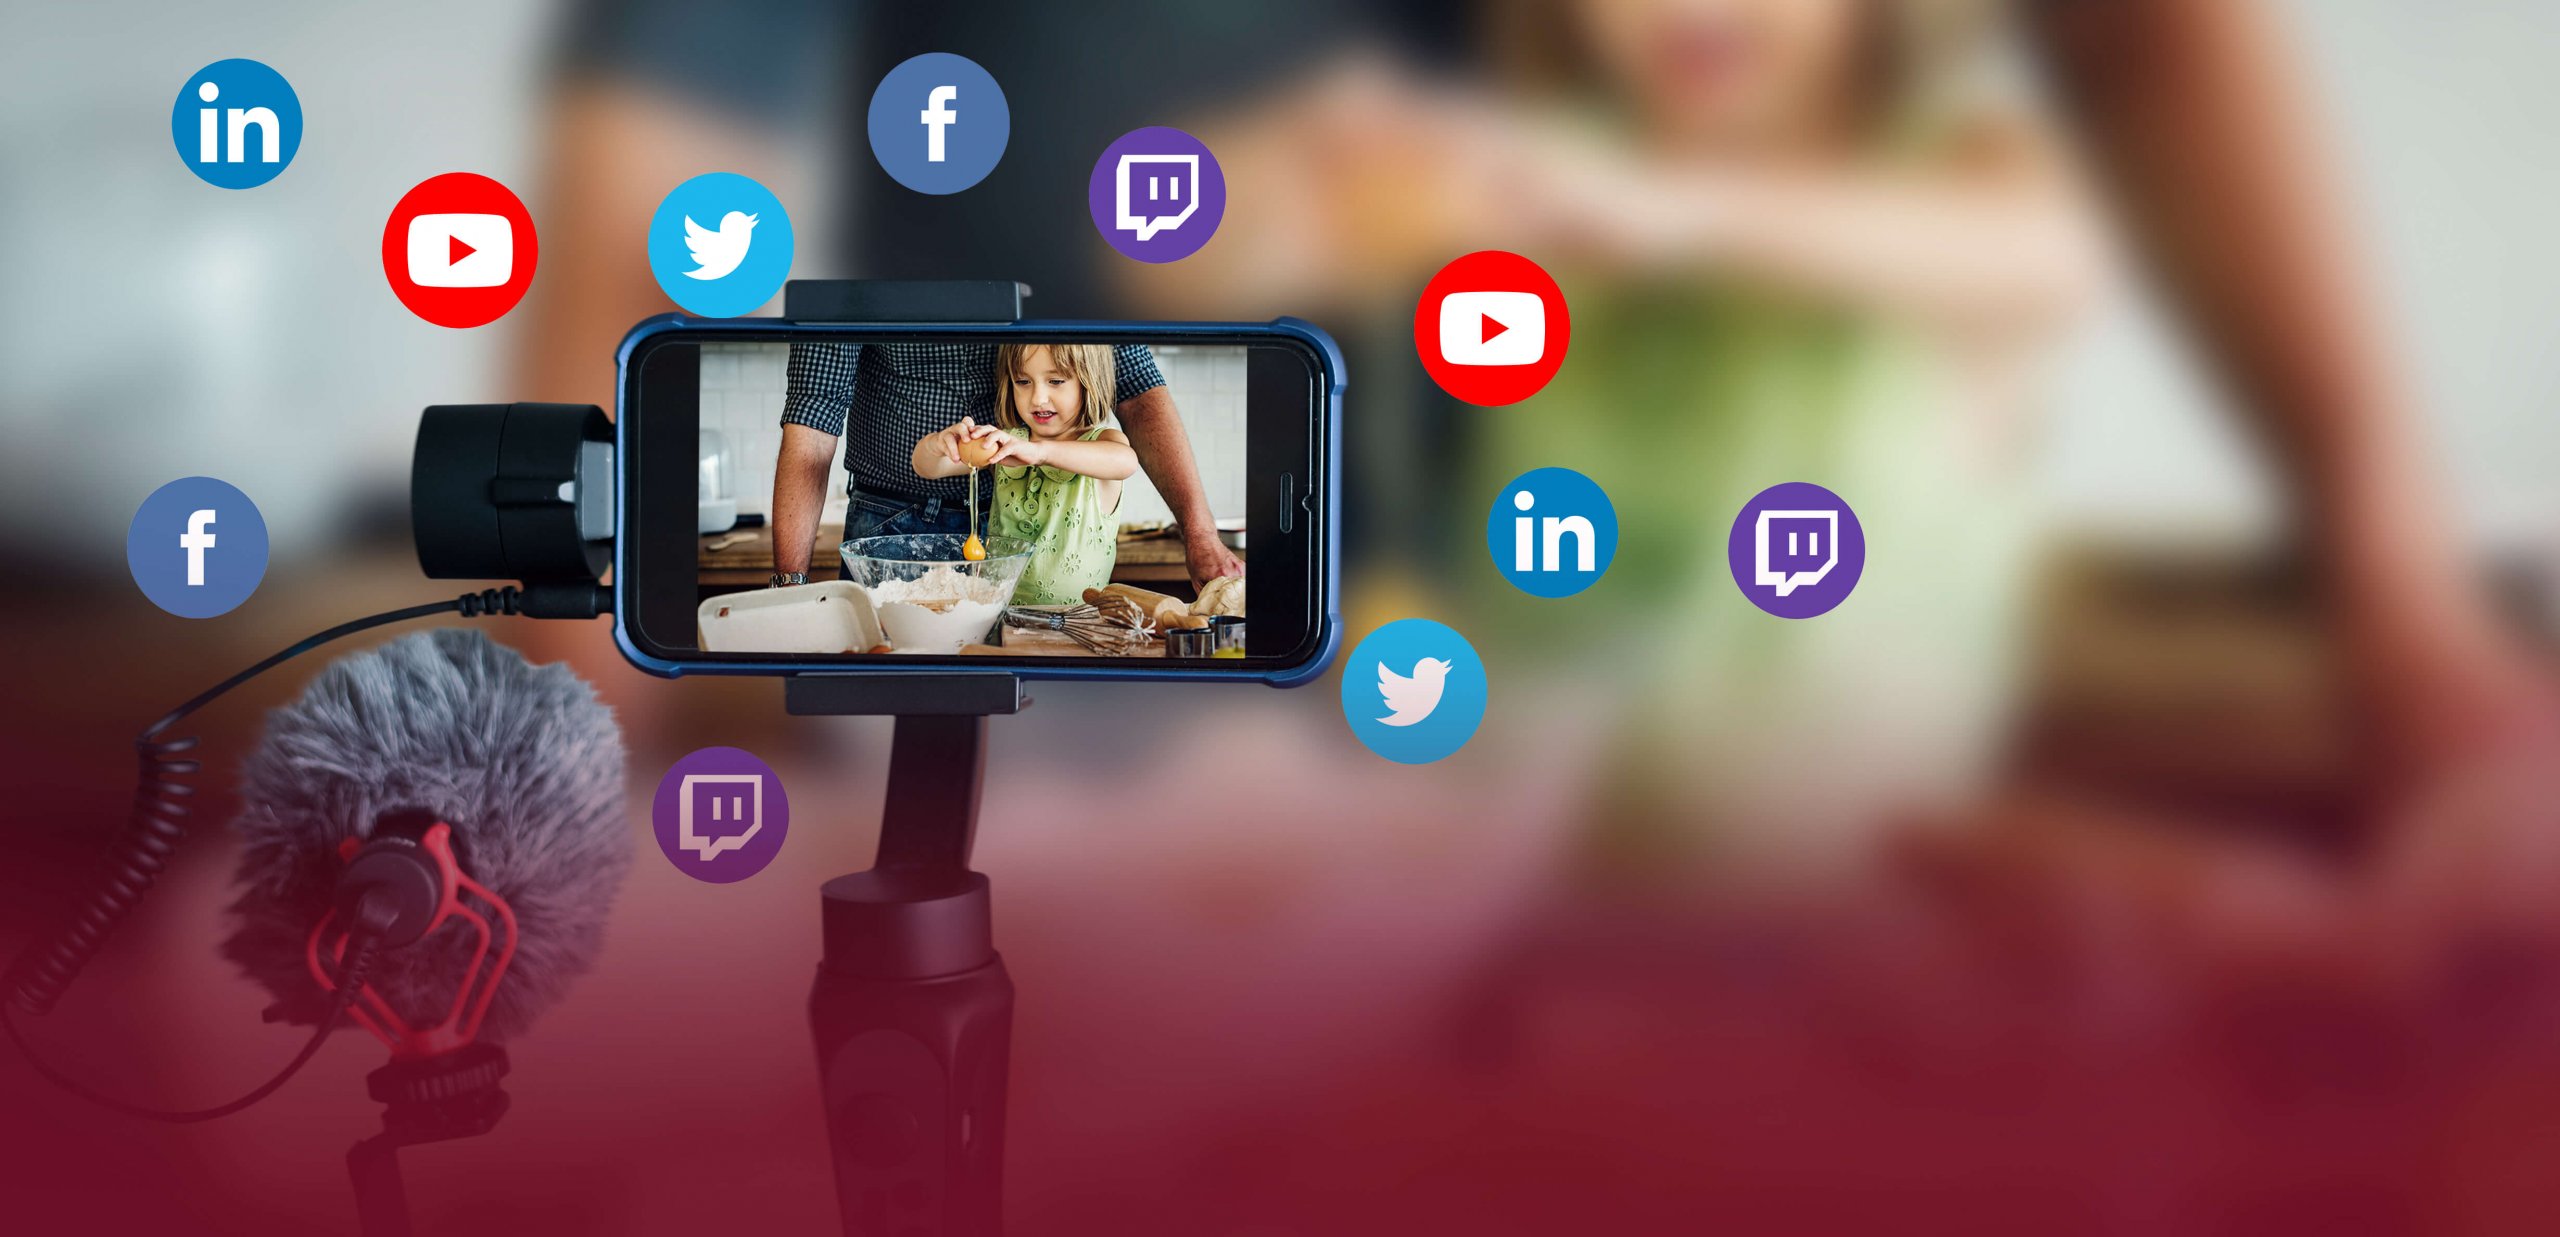 Multistream Real-time & Recorded Videos Seamlessly - OneStream Live